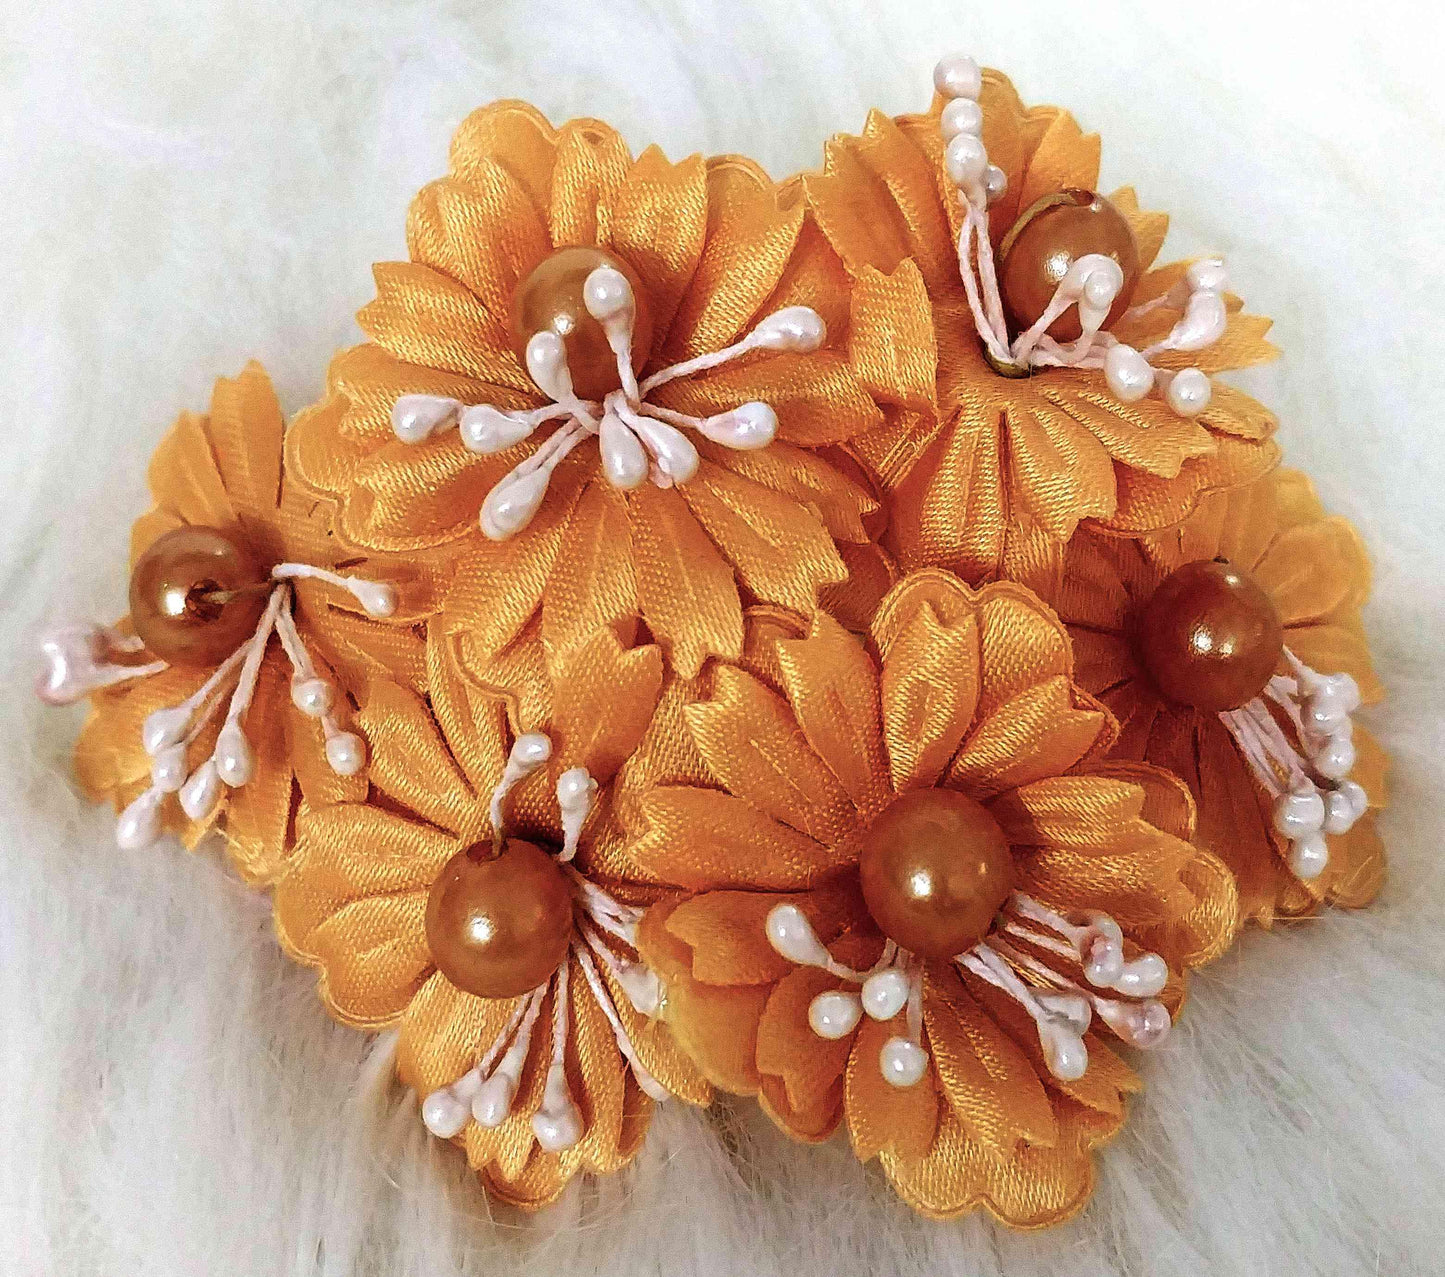 Indian Petals Beautiful Fabric Flowers for DIY Craft, Trouseau Packing or Decoration (Bunch of 12) - Design 12 - Indian Petals